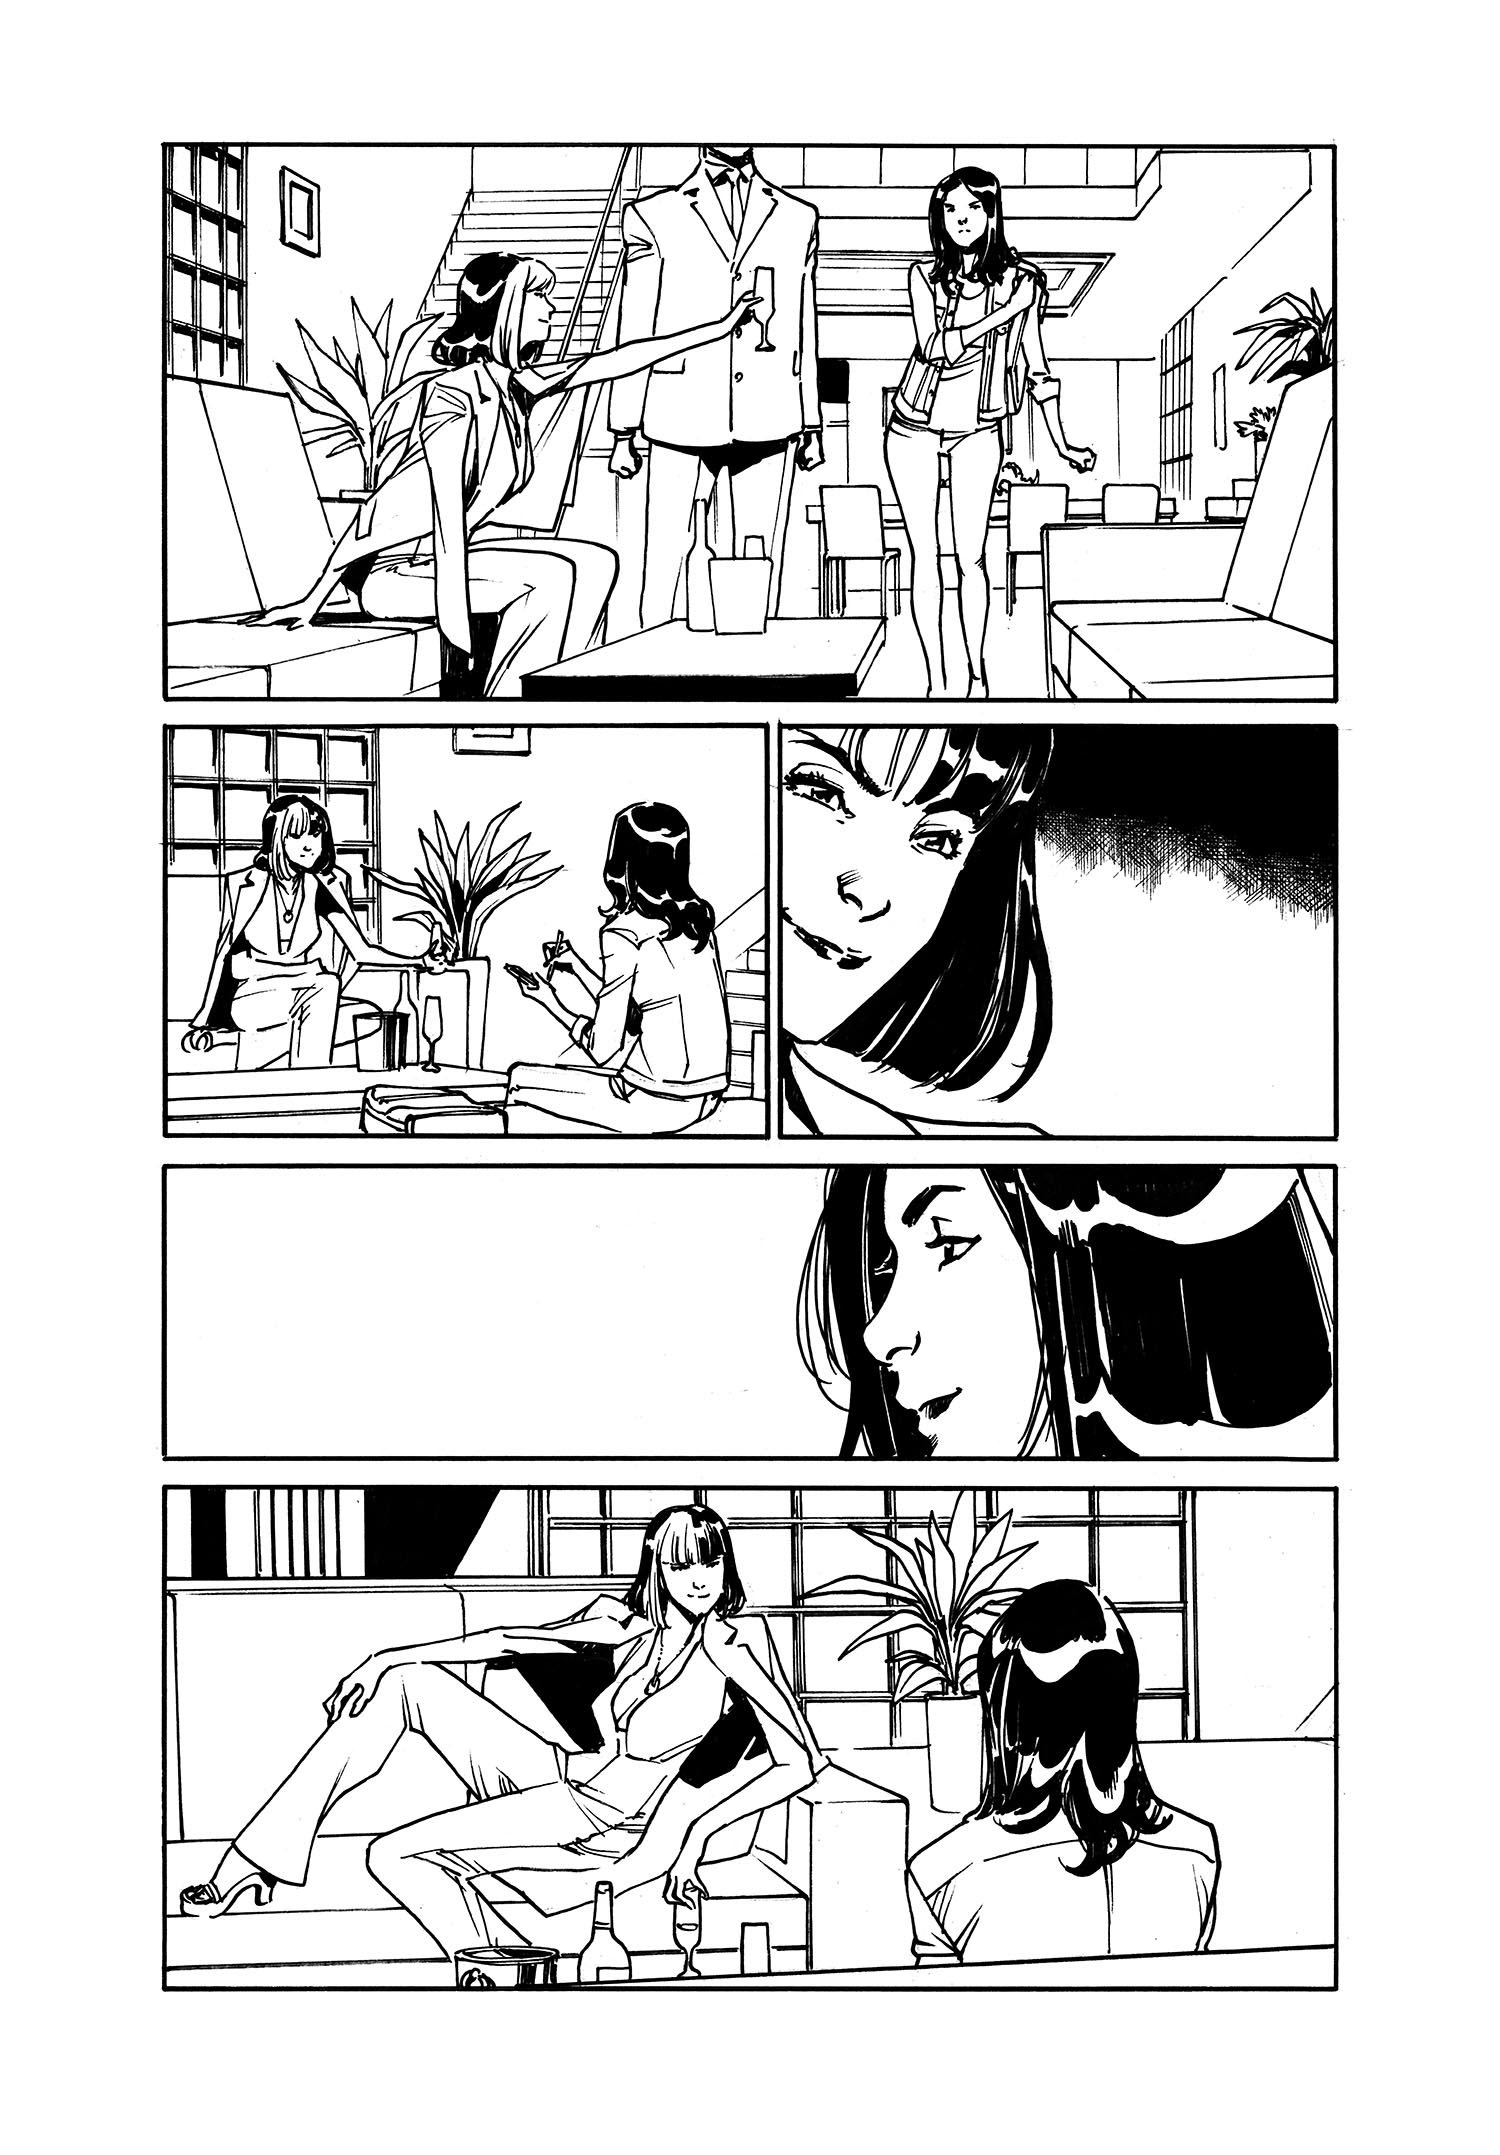 Image of Silk 3 Page 10